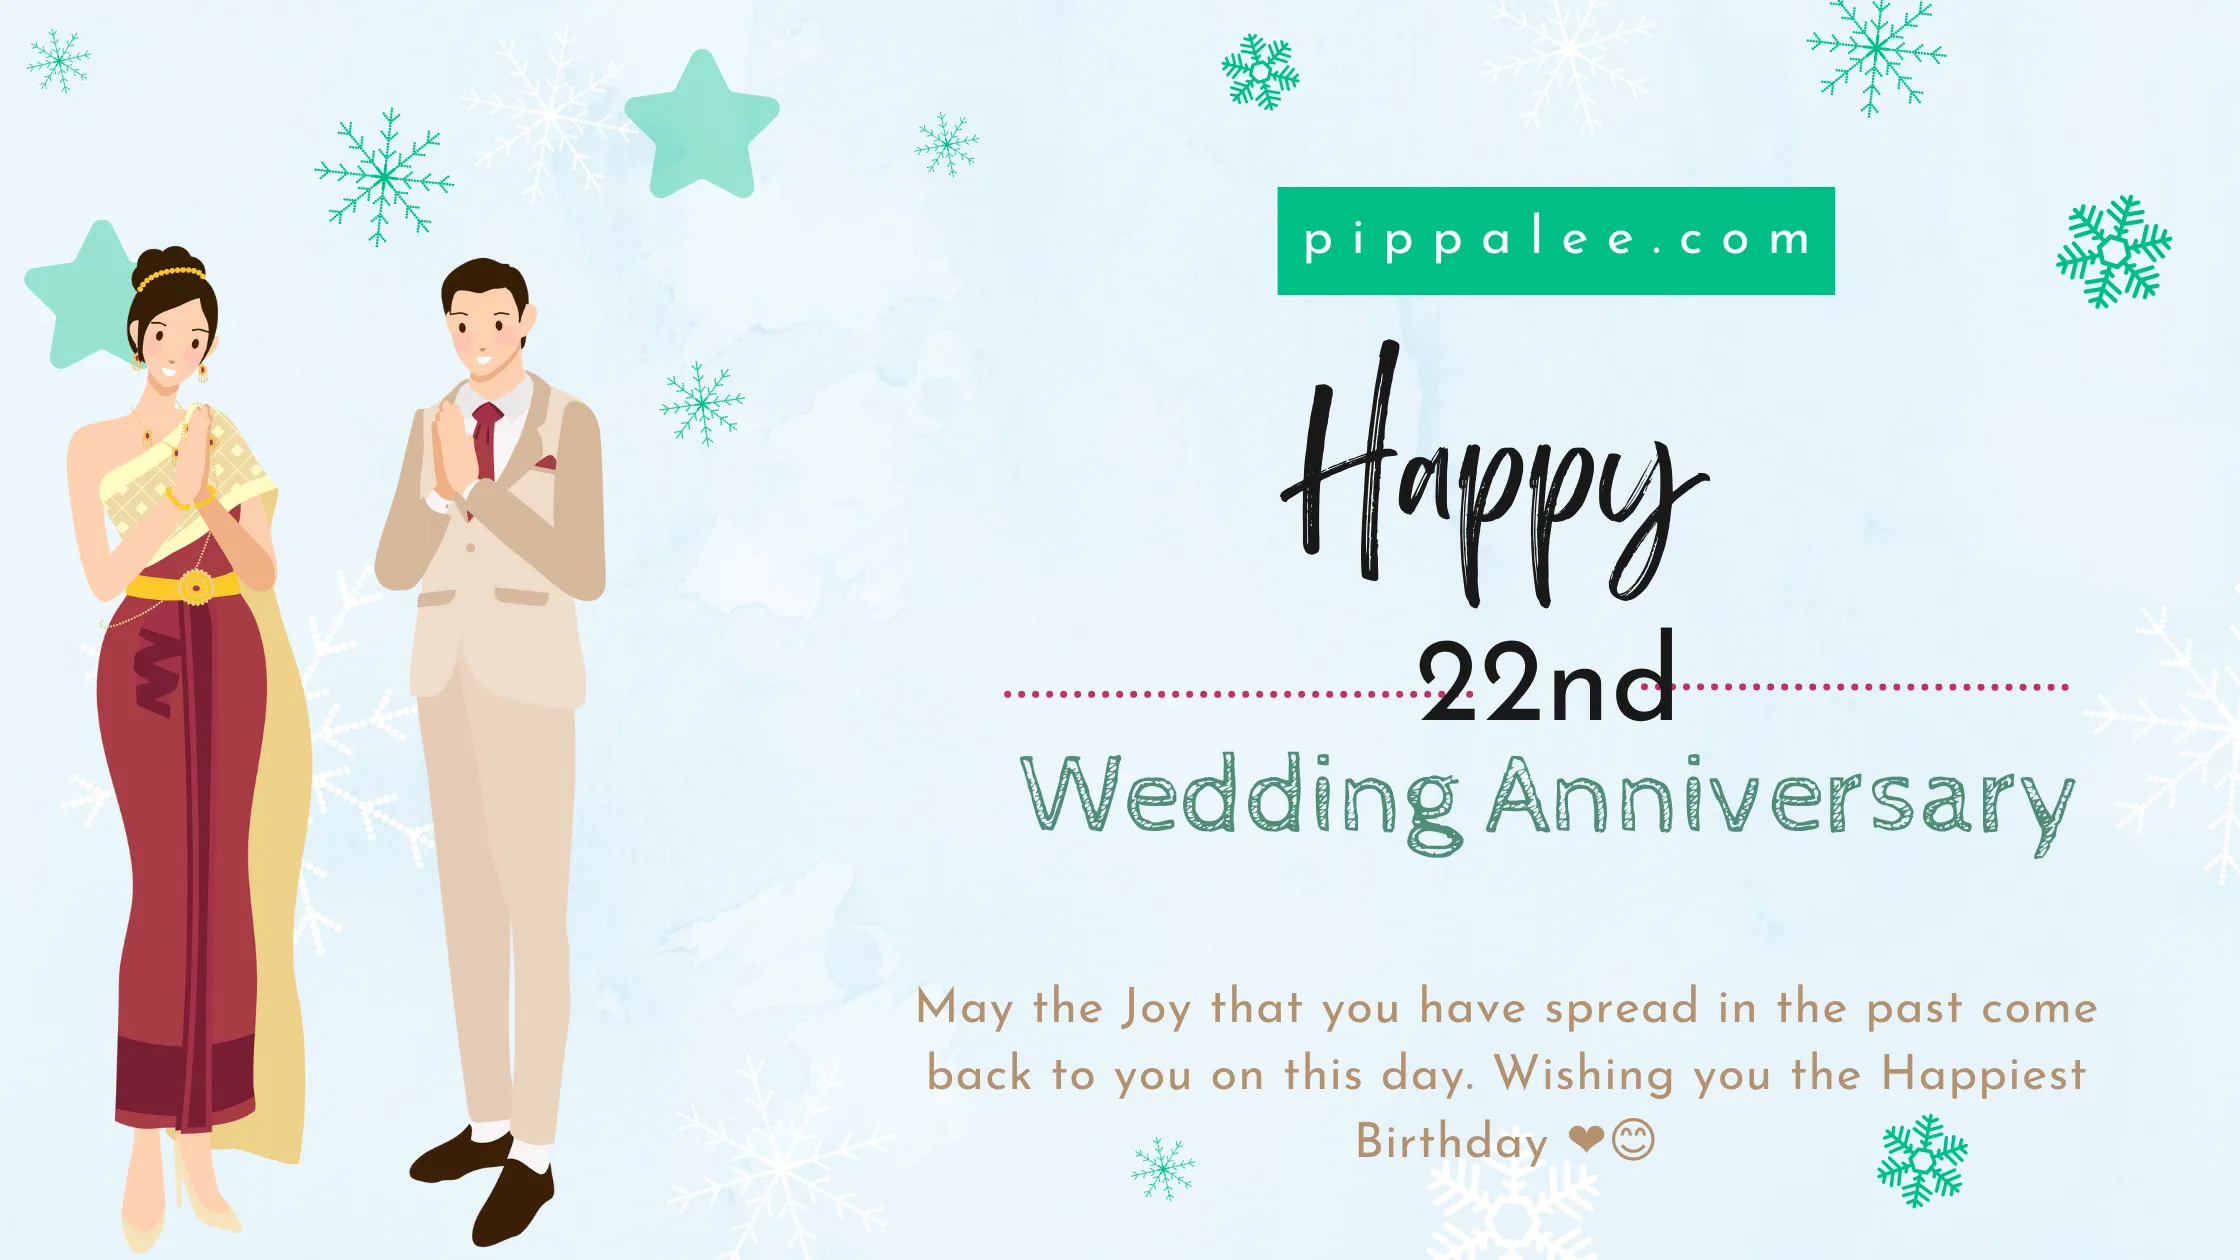 22nd Wedding Anniversary - Wishes & Messages